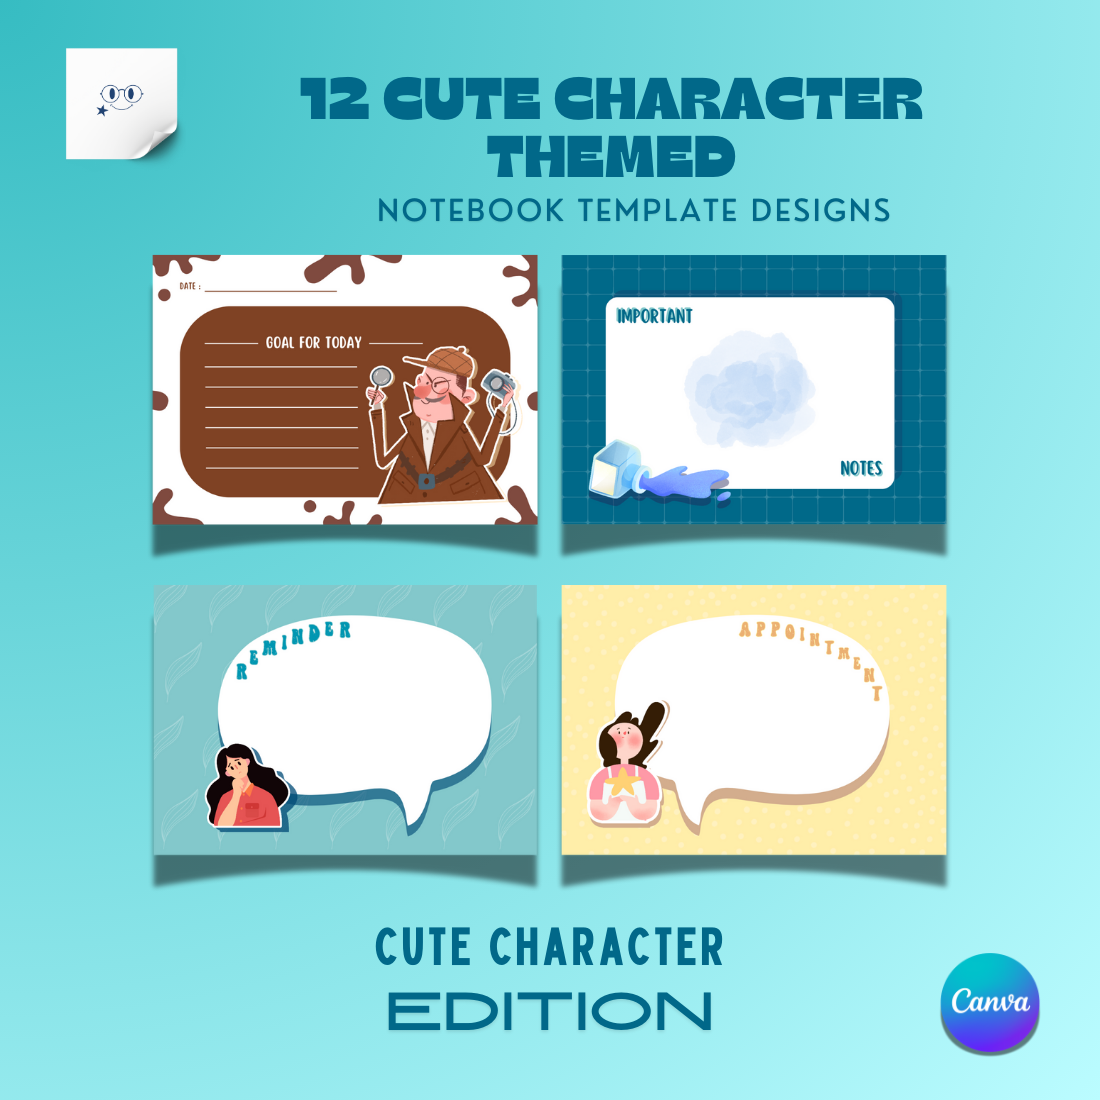 12 Cute Character Theme for Notebook and Planner - Only 7 preview image.